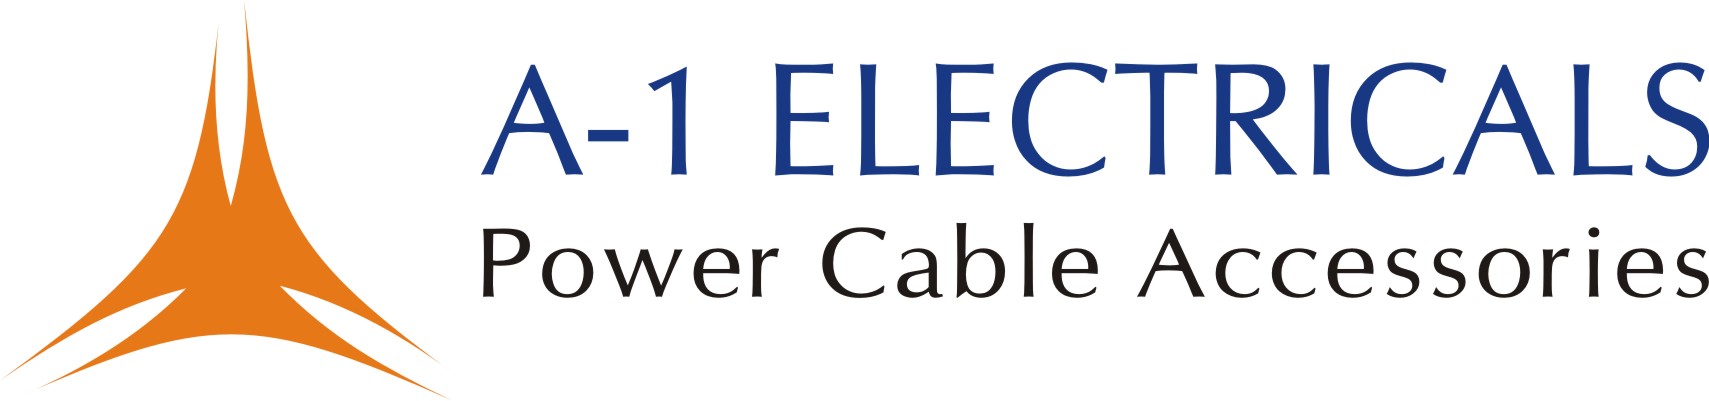 A-1 ELECTRICALS